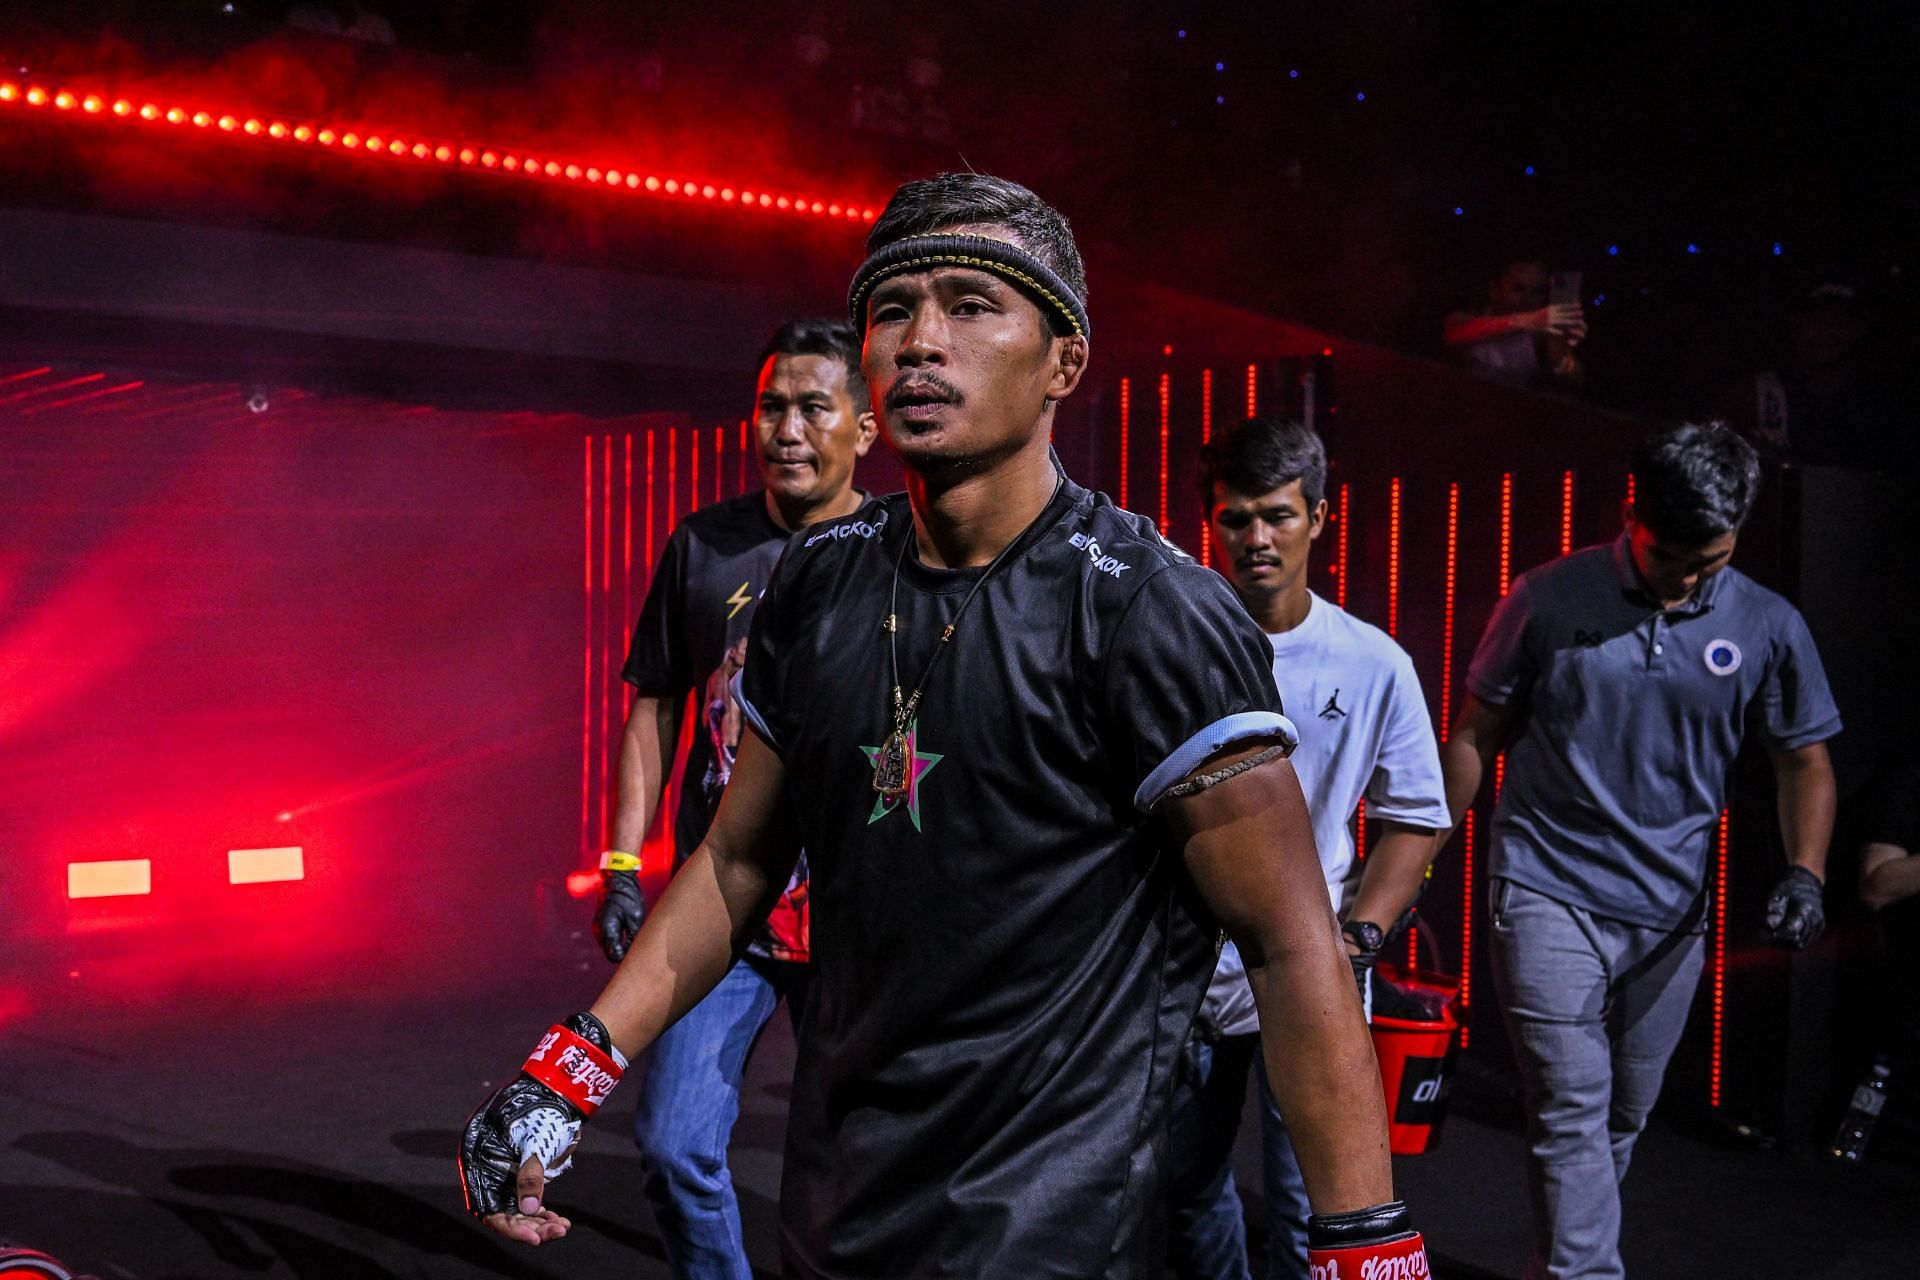 Superlek heads to the ring against Kongthoranee at ONE Friday Fights 68.